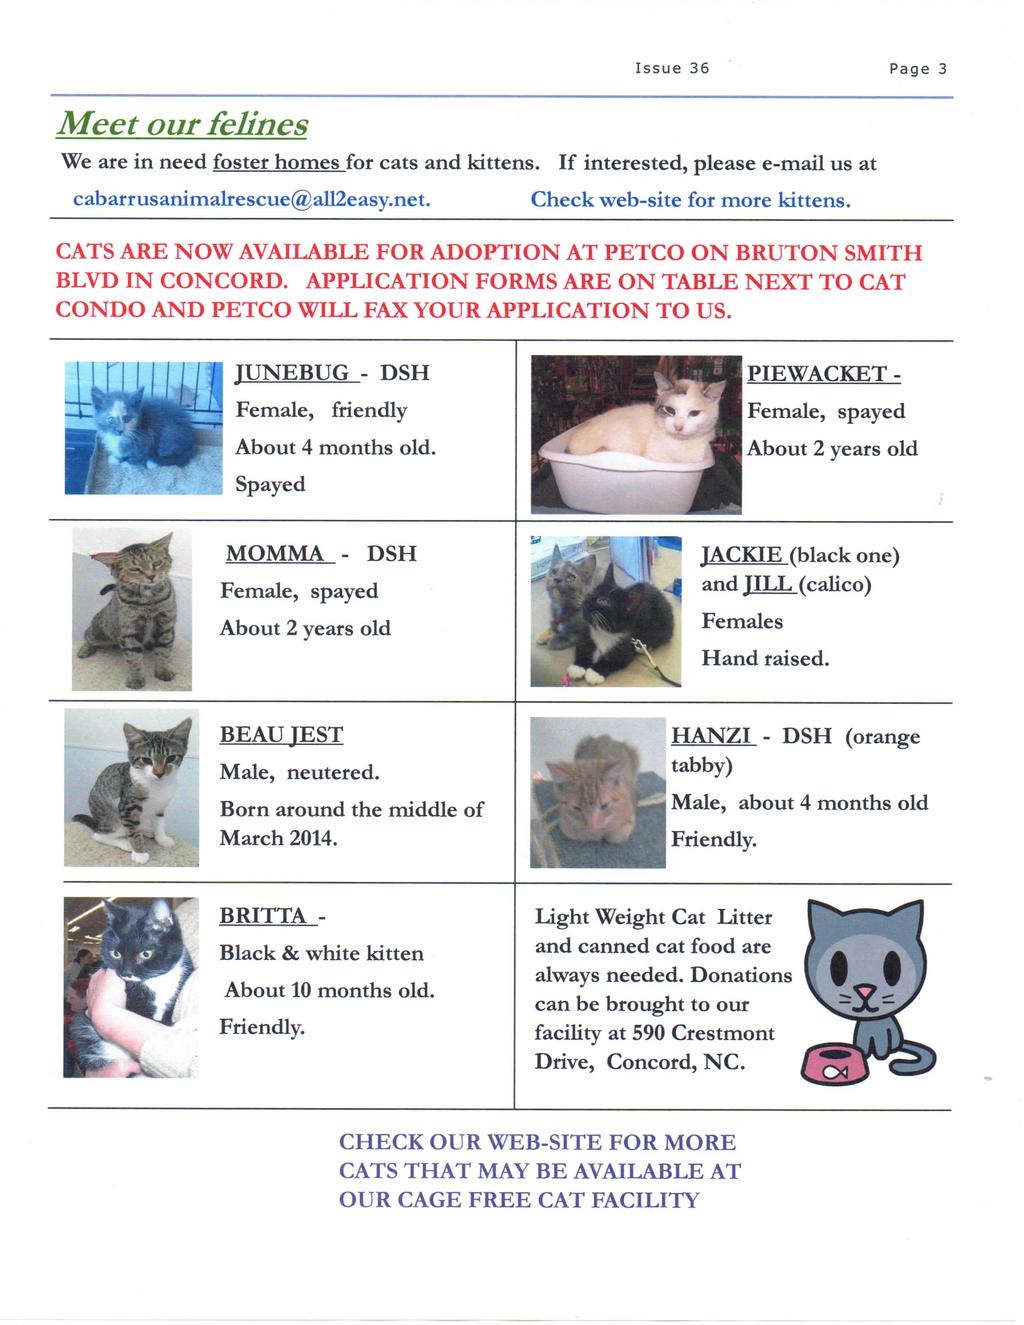 Issue 36 Page 3 Meet our felines We are in need foster homes for cats and kittens. If interested, please e-mail us at cabarrusanimalrescue@all2easy.net. Check web-site for more kittens.